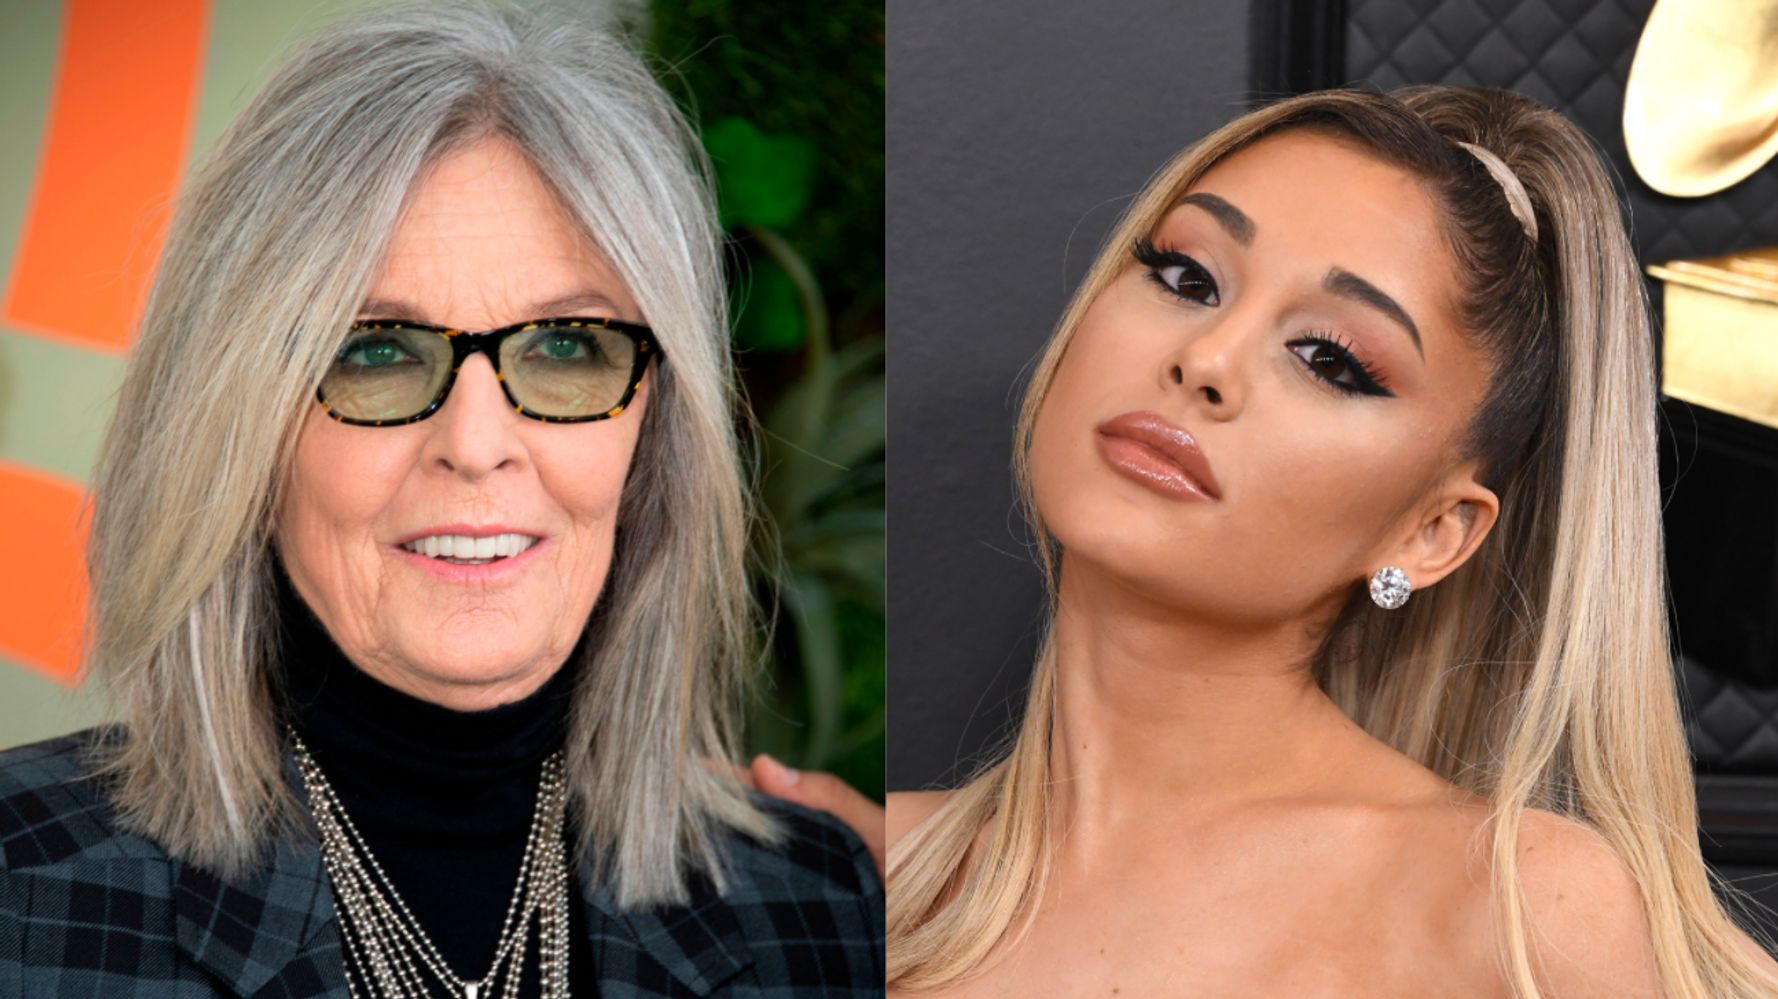 Ariana Grande Has 'Out Of Body Experience' With Diane Keaton